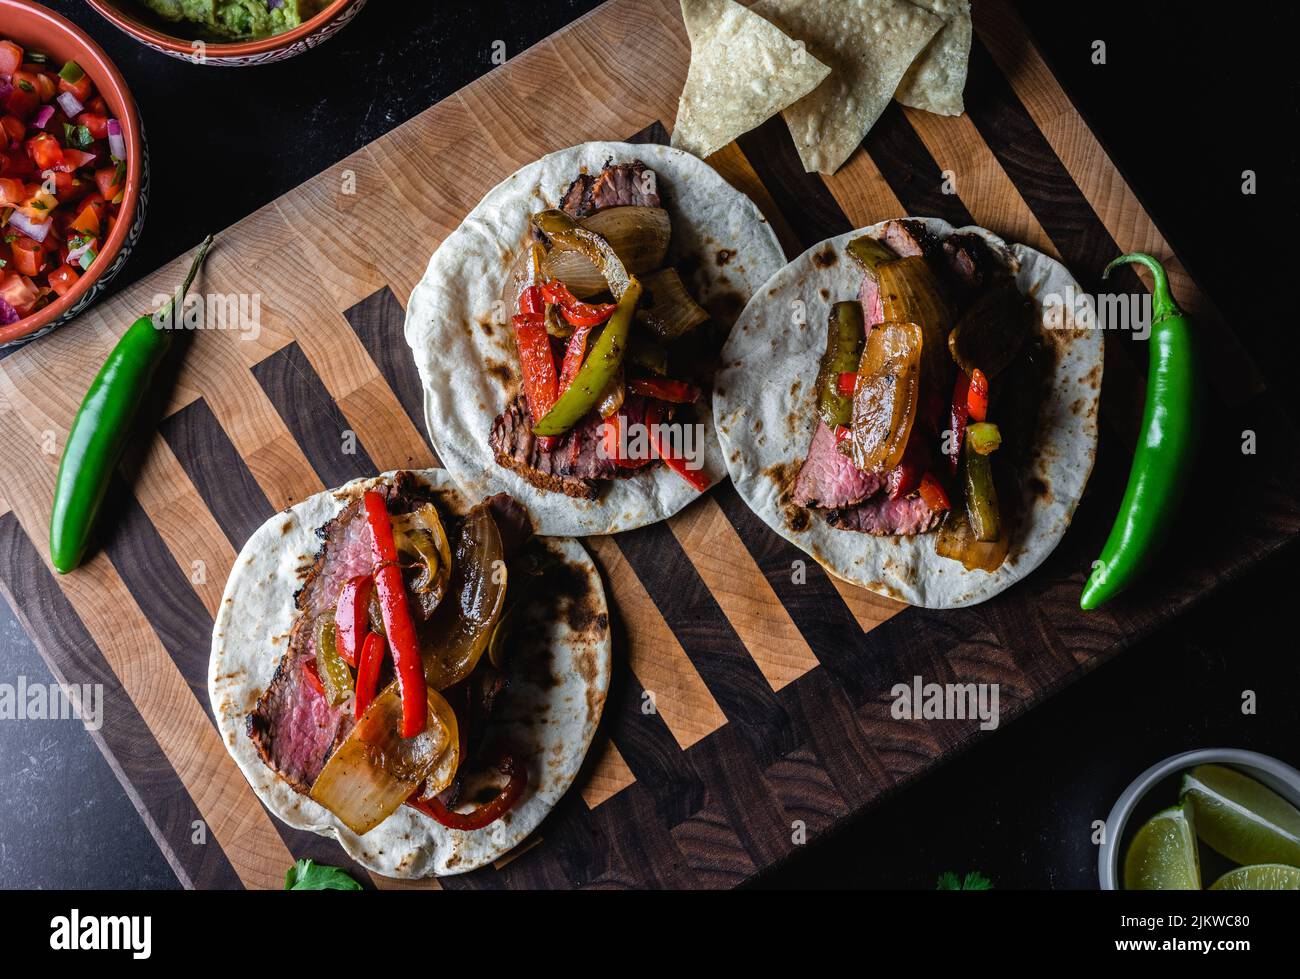 A top view of fajitas on tortillas with grilled steak, peppers, salsa, and jalapenos on a wooden board Stock Photo